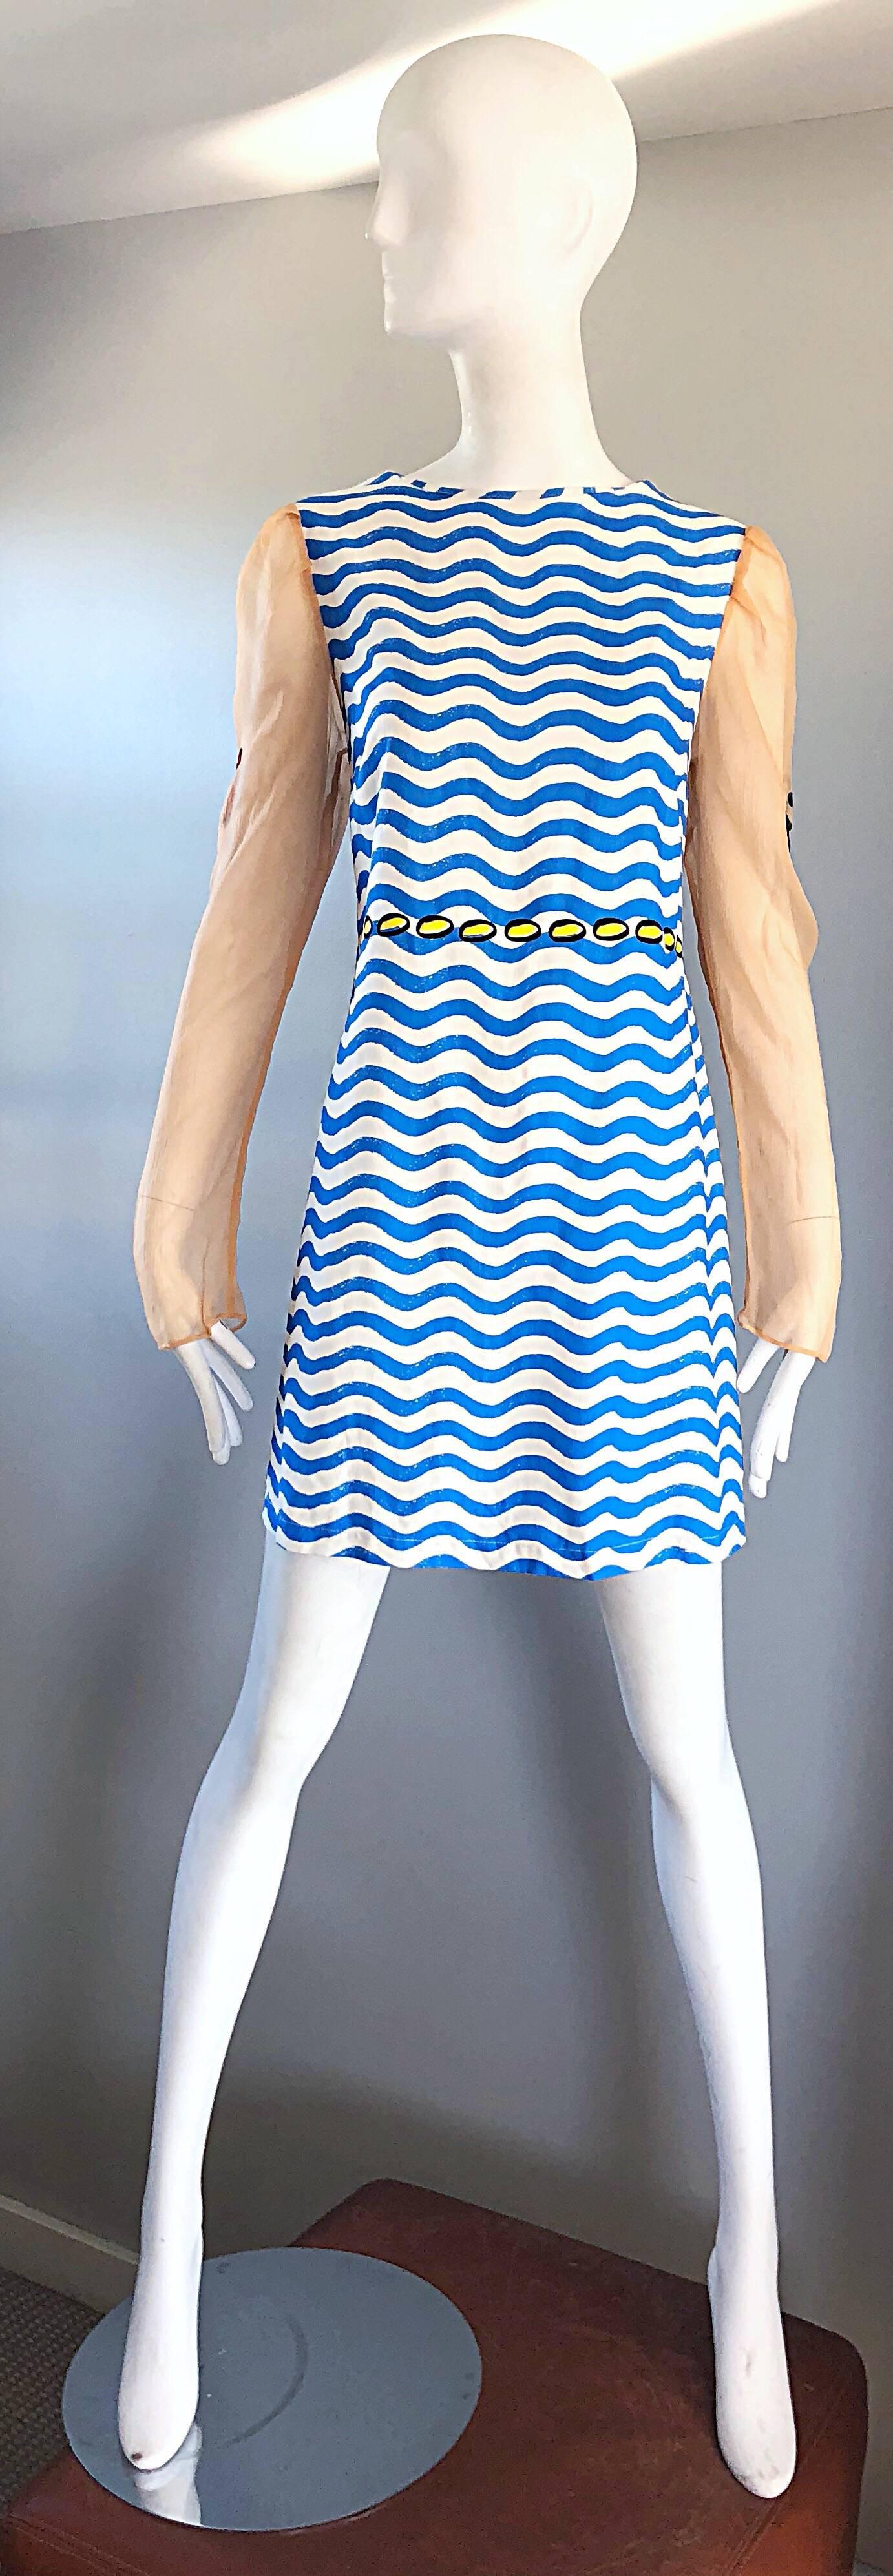 Rare and limited edition THE RODNIK BAND novelty nautical silk dress! Features blue and white squiggly stripes on the body of the dress, with yellow polka dots directly above the waist. Nude silk chiffon sleeves features trompe l'oeil tattoo prints